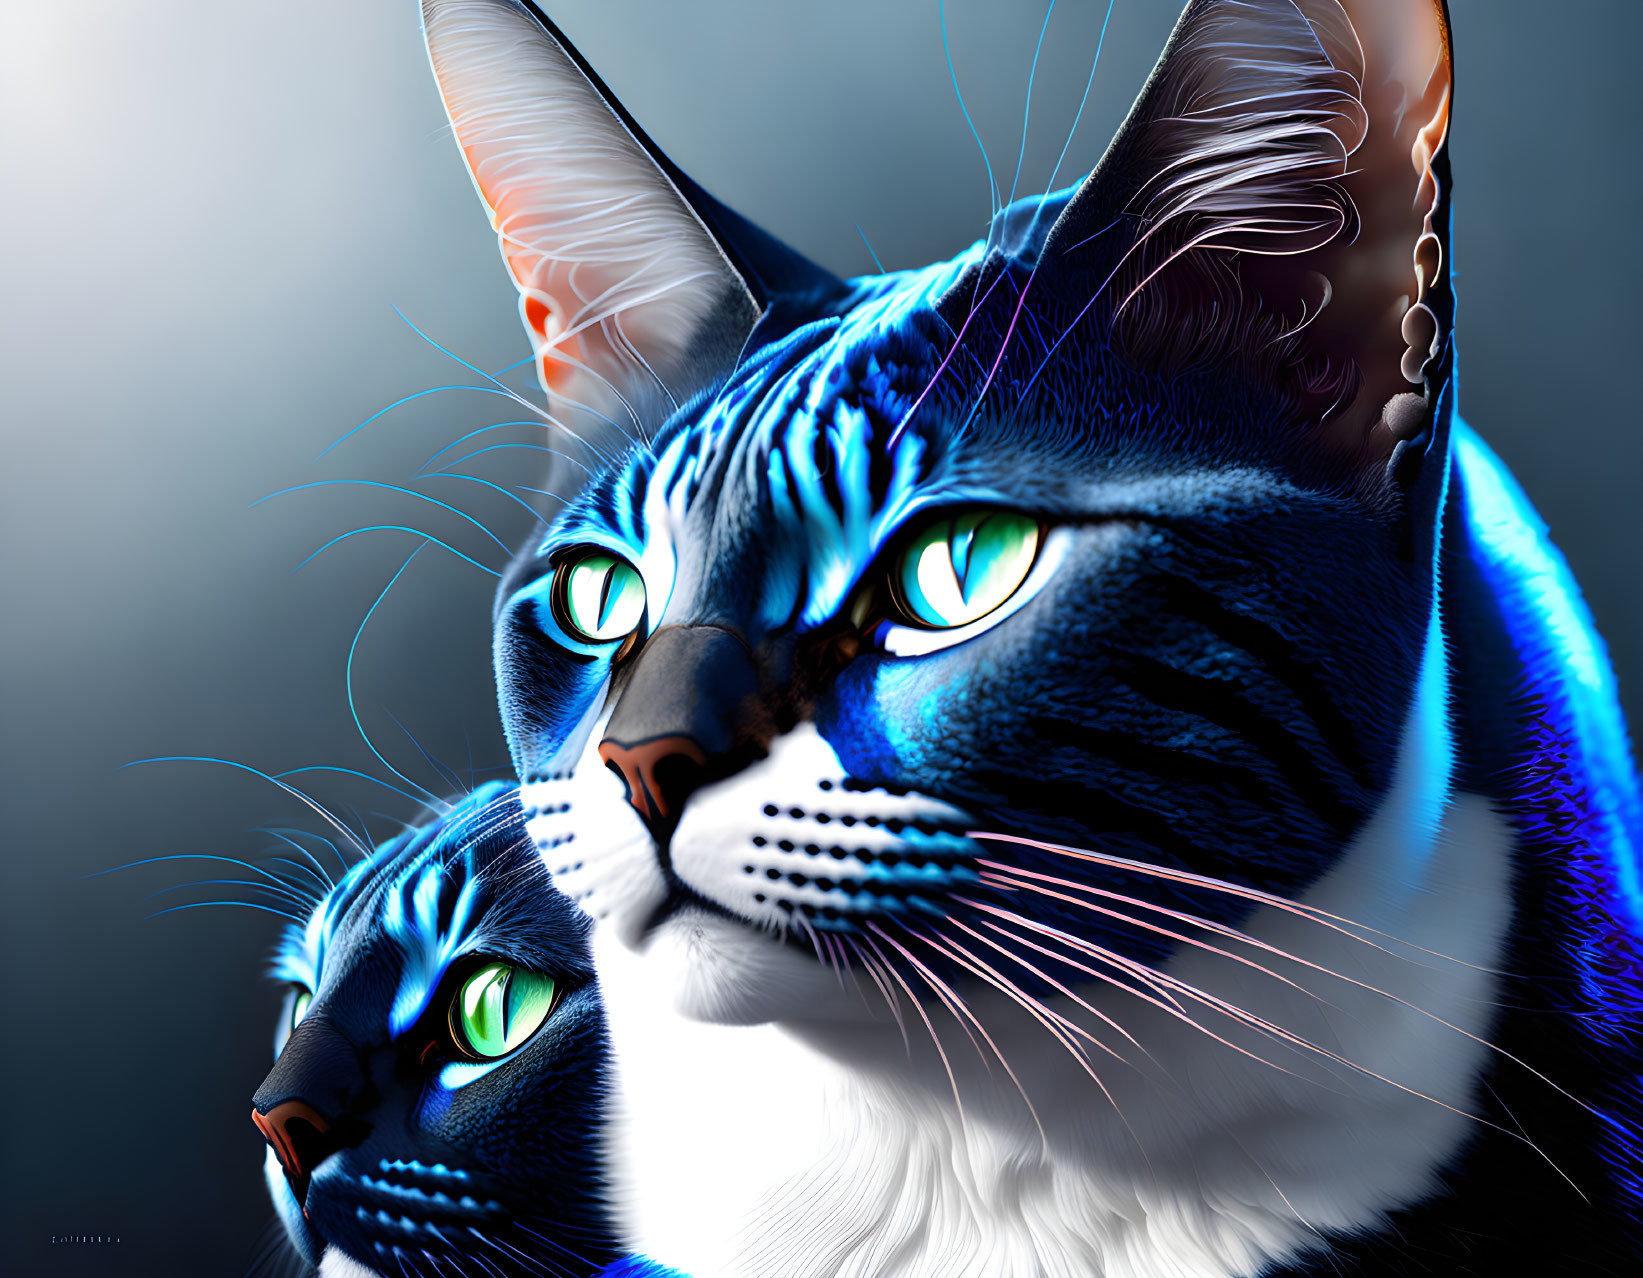 Vividly colored digital cats with blue and green eyes on shaded backdrop